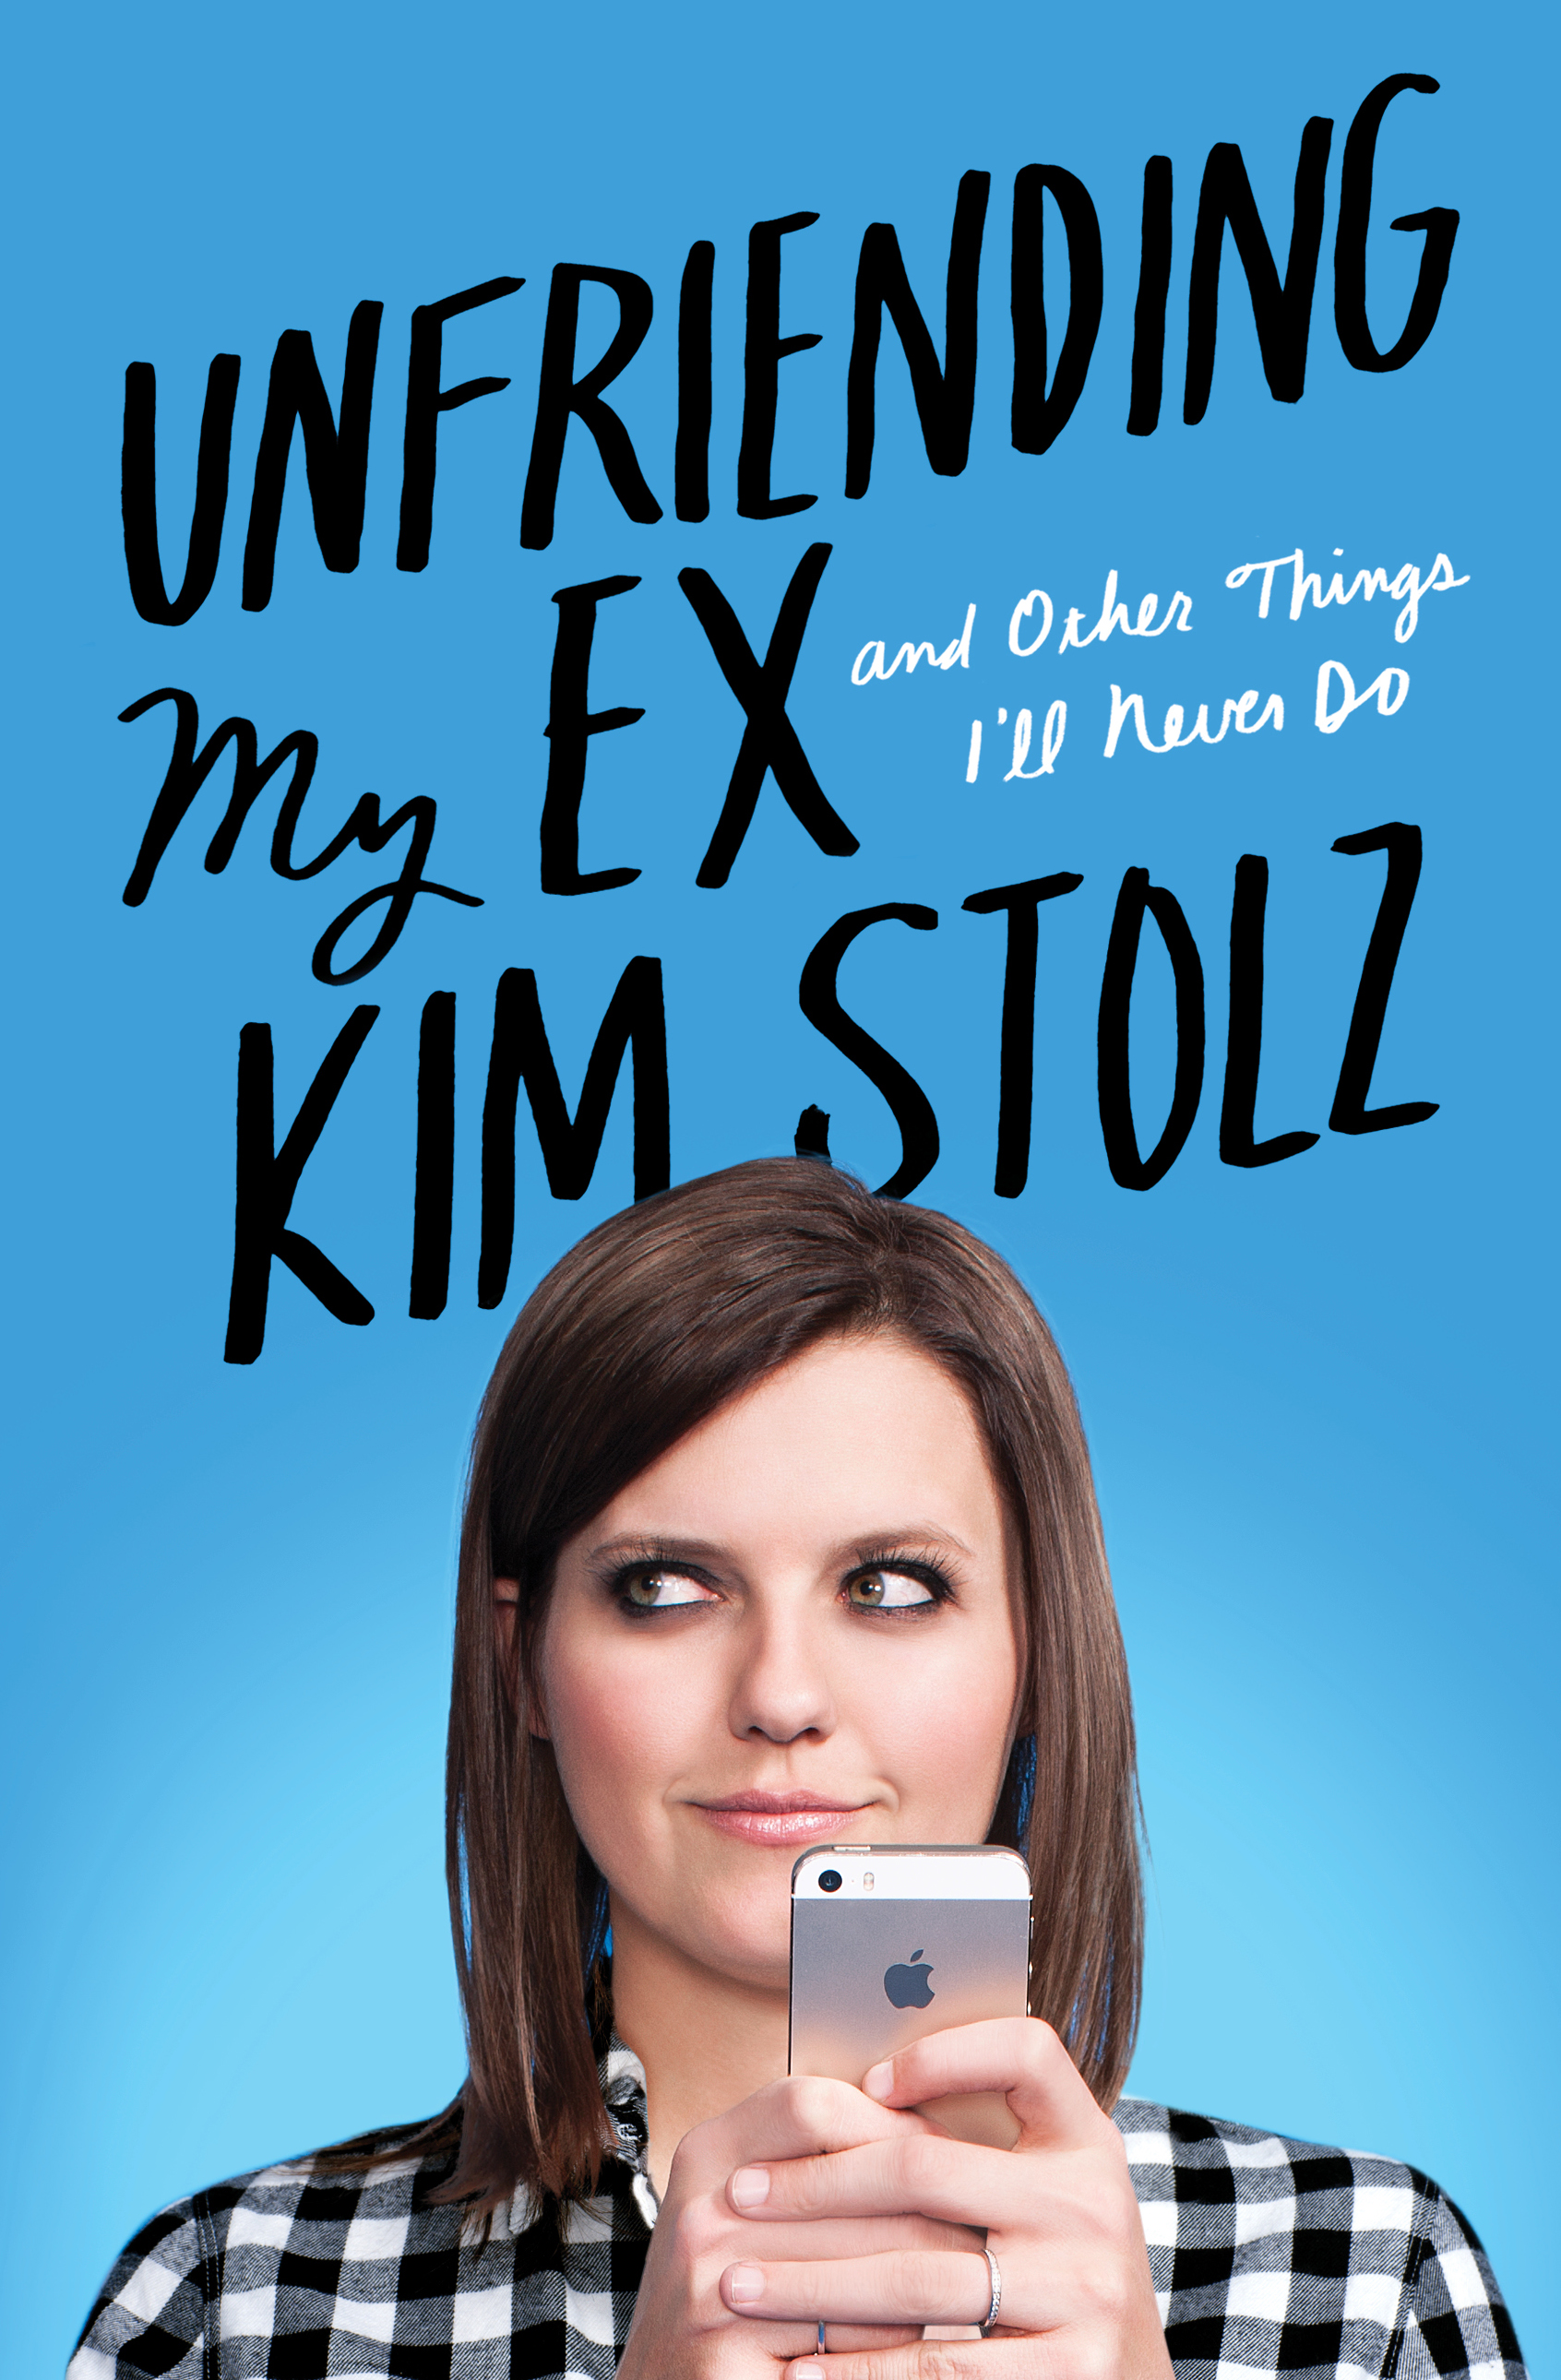 Unfriending My Ex (And Other Things I'll Never Do) by Kim Stolz